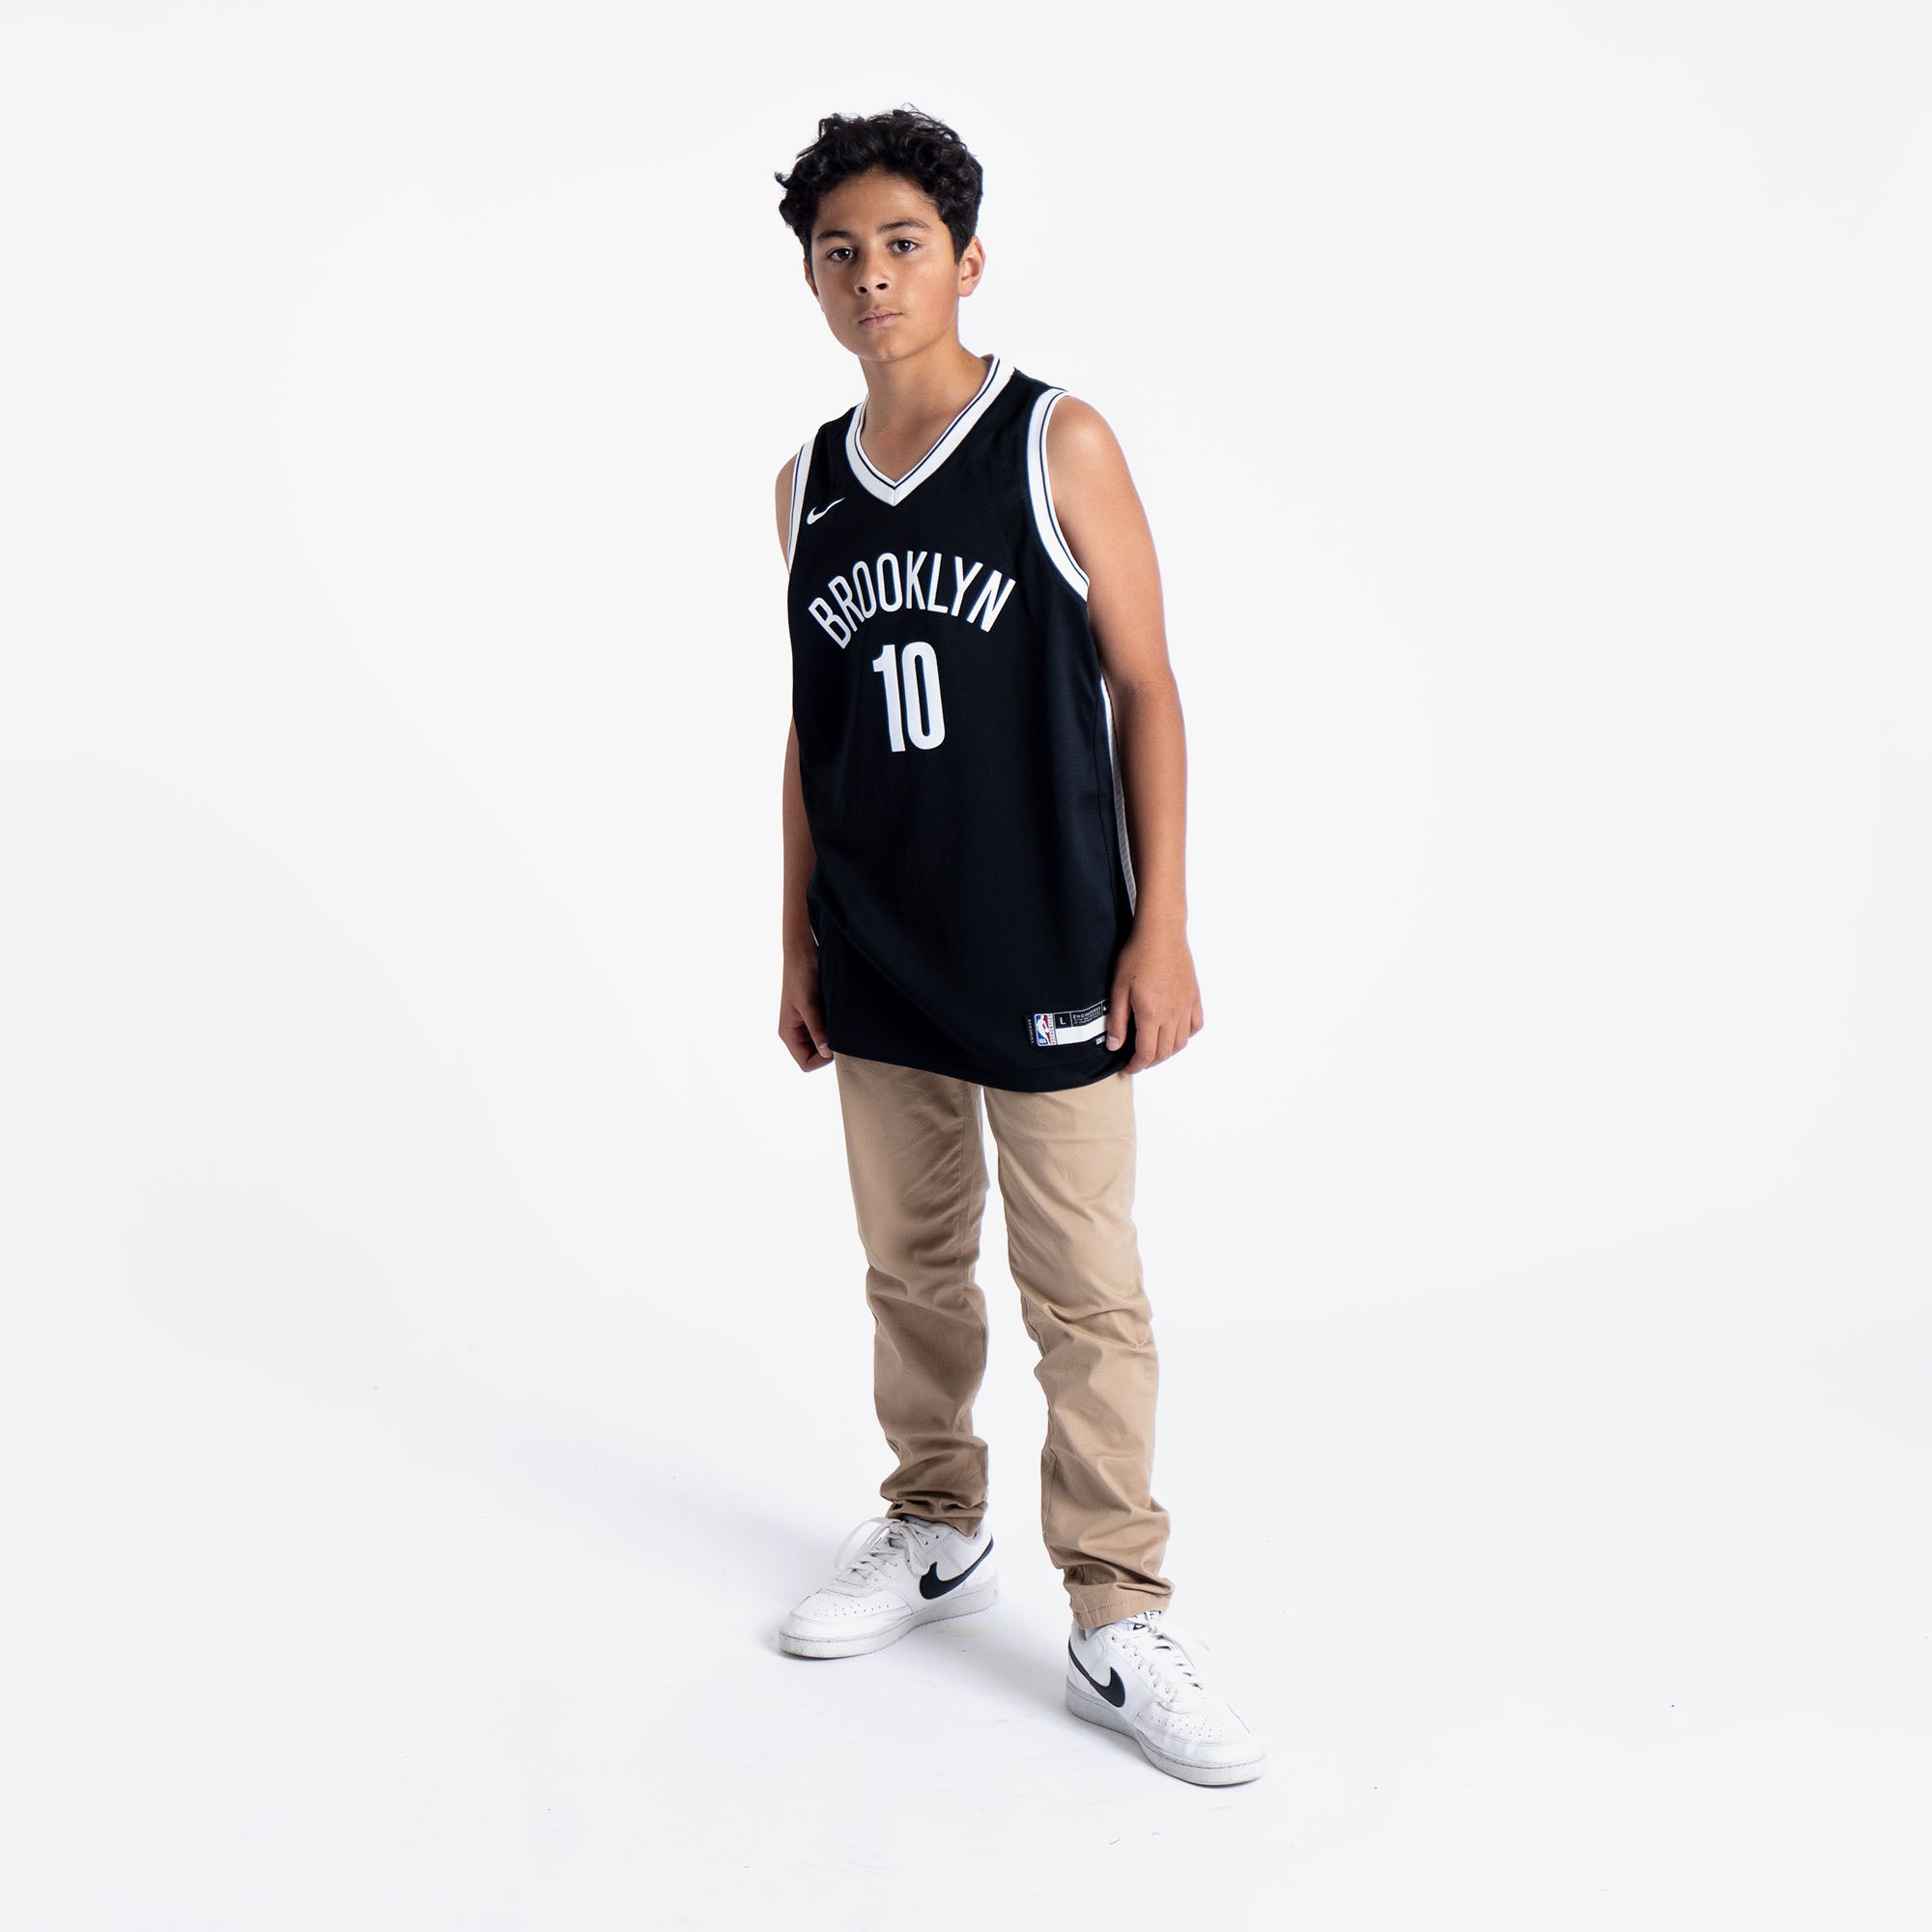 ben simmons jersey youth